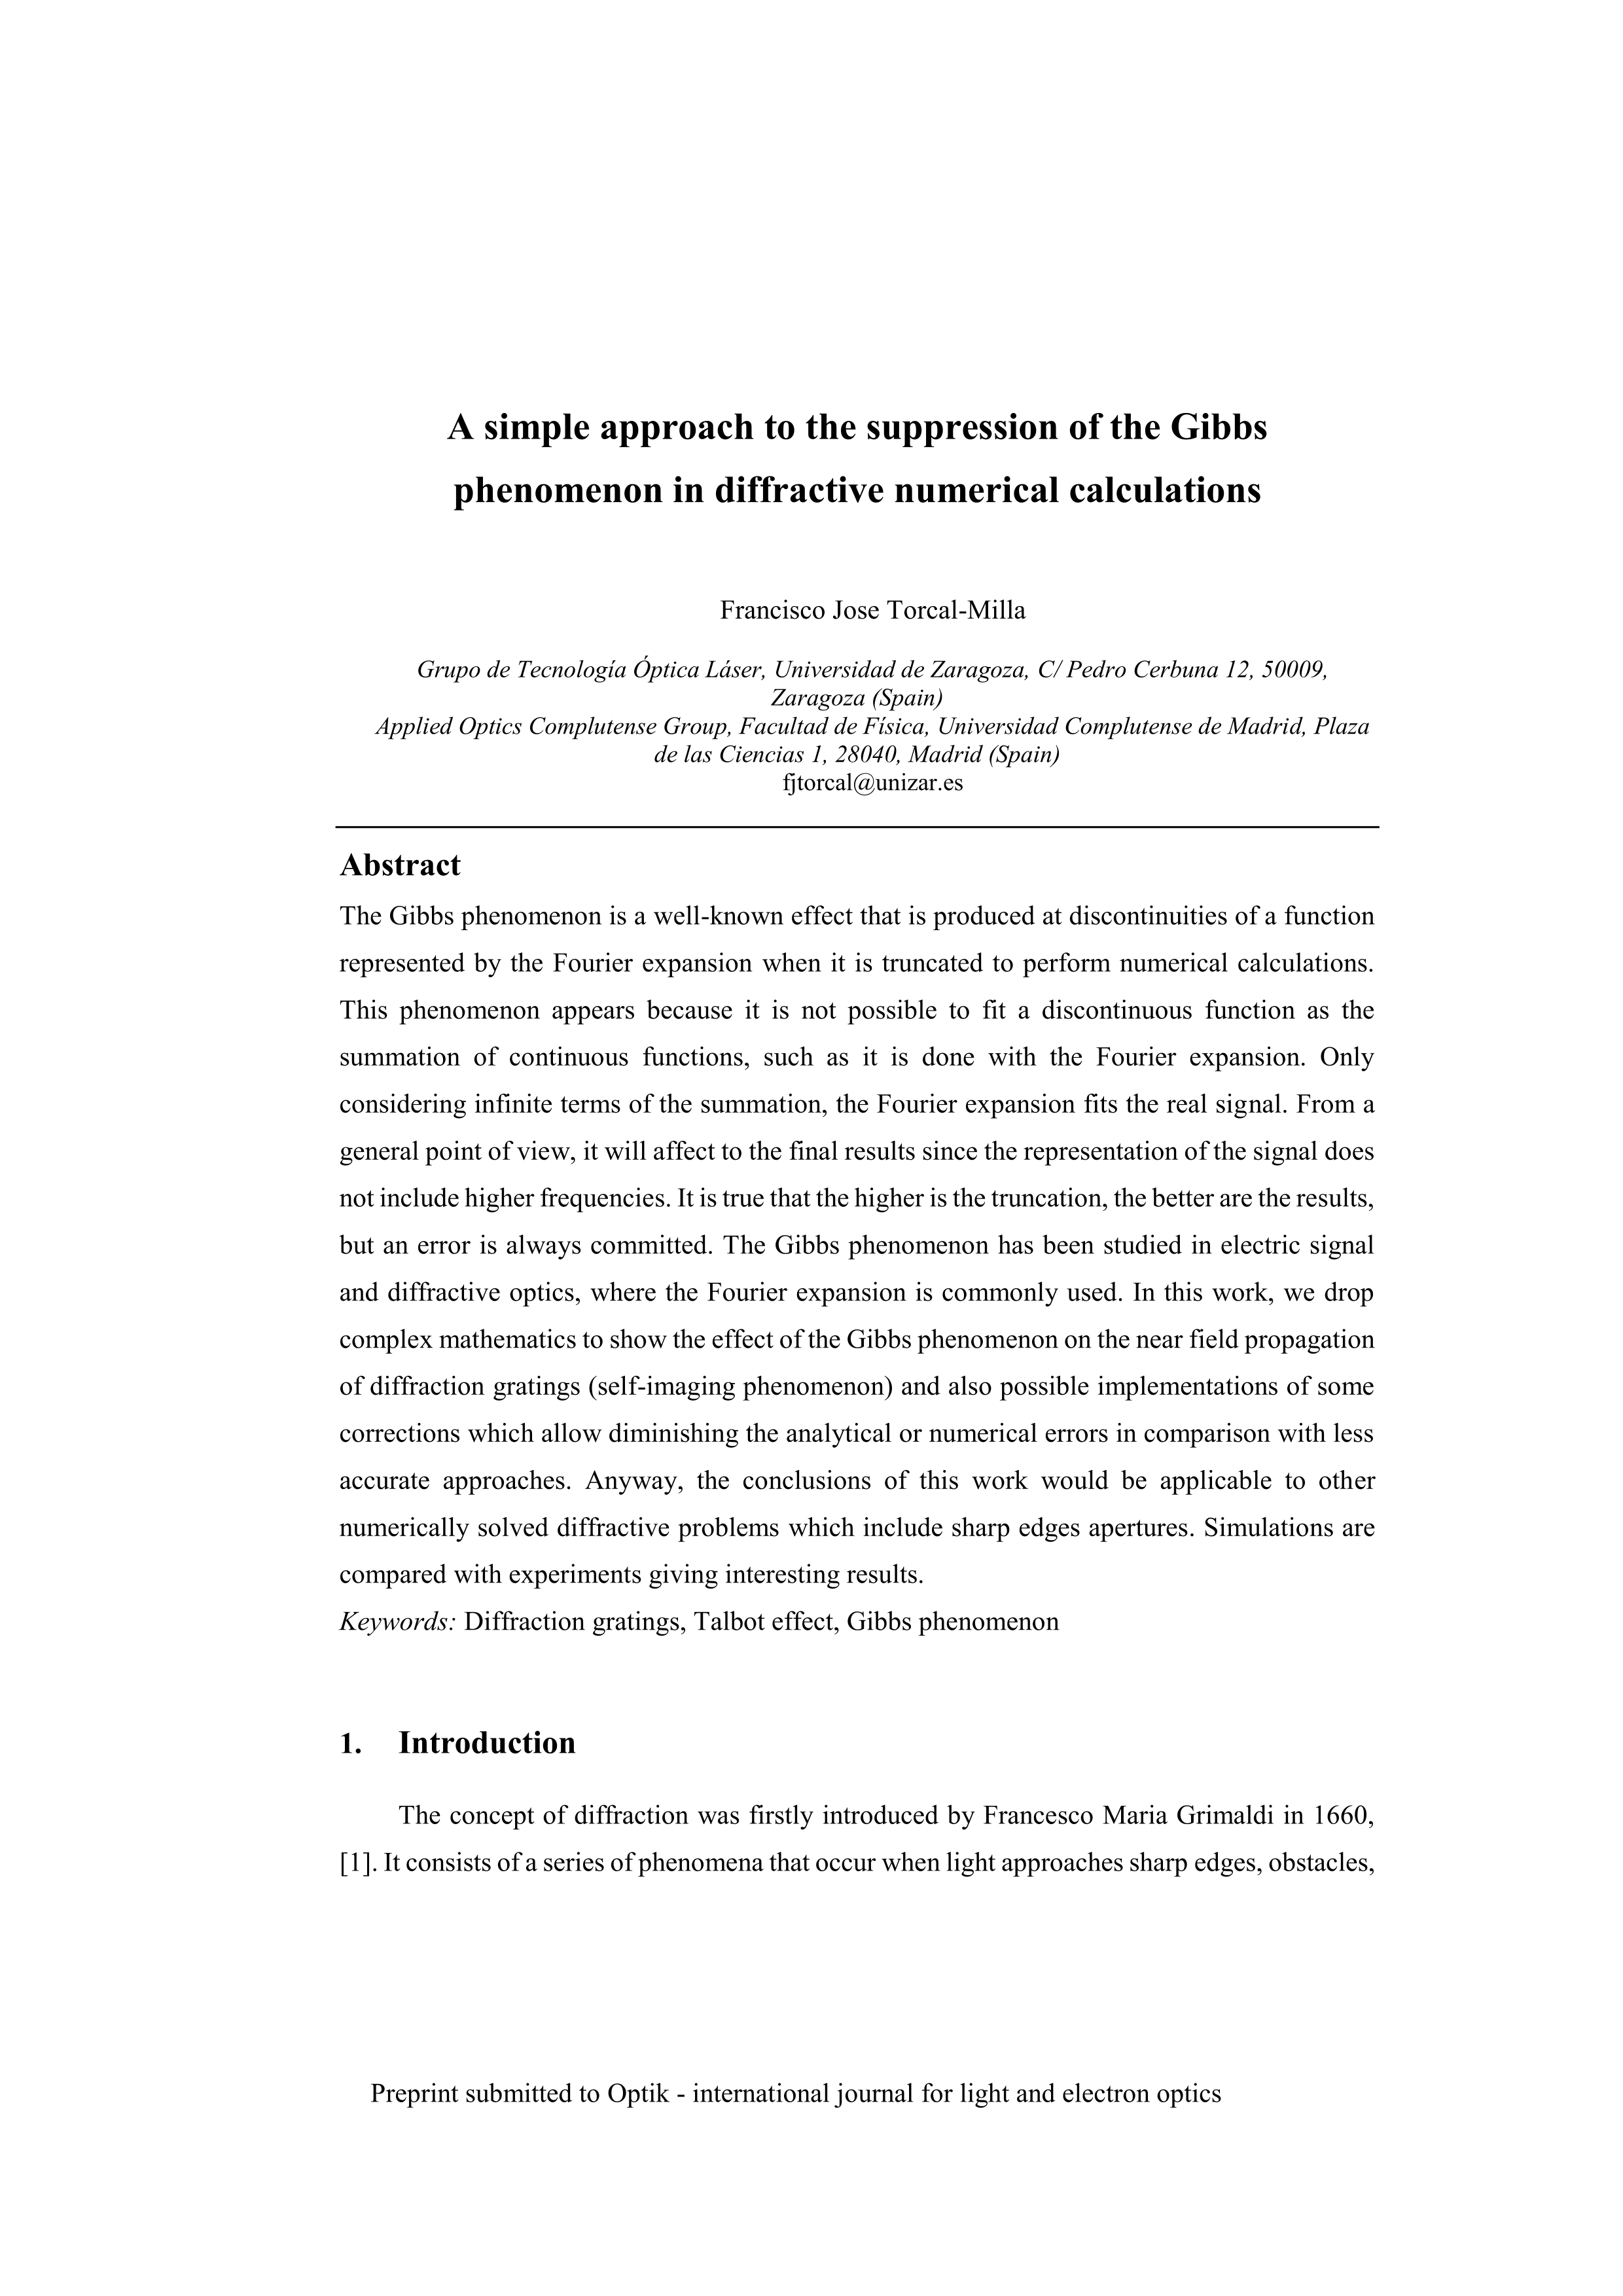 A simple approach to the suppression of the Gibbs phenomenon in diffractive numerical calculations